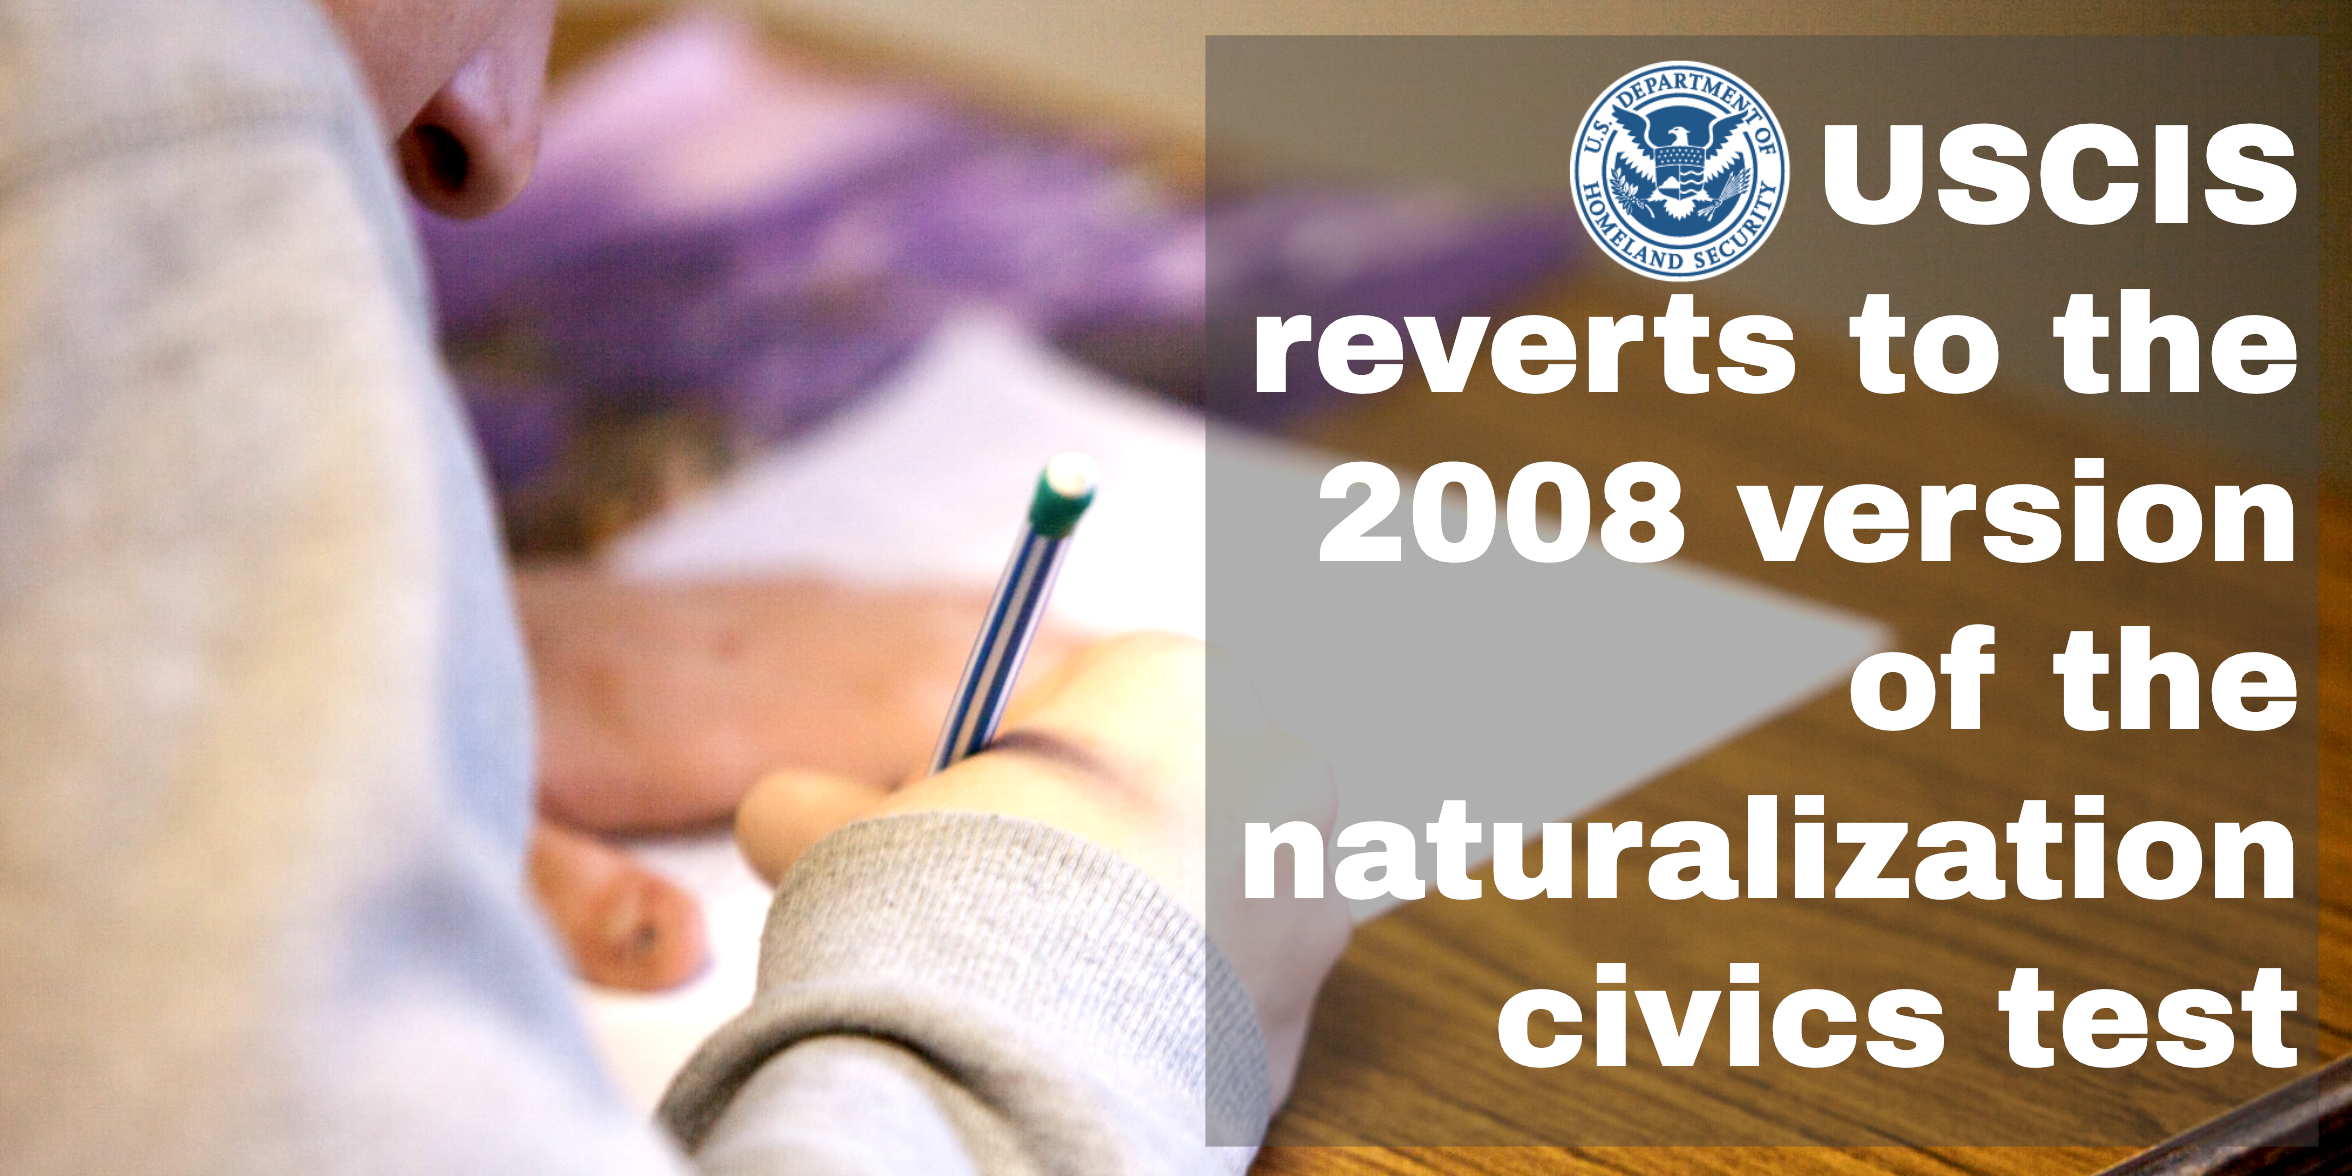 USCIS Reverts to the 2008 Version of the Naturalization Civics Test